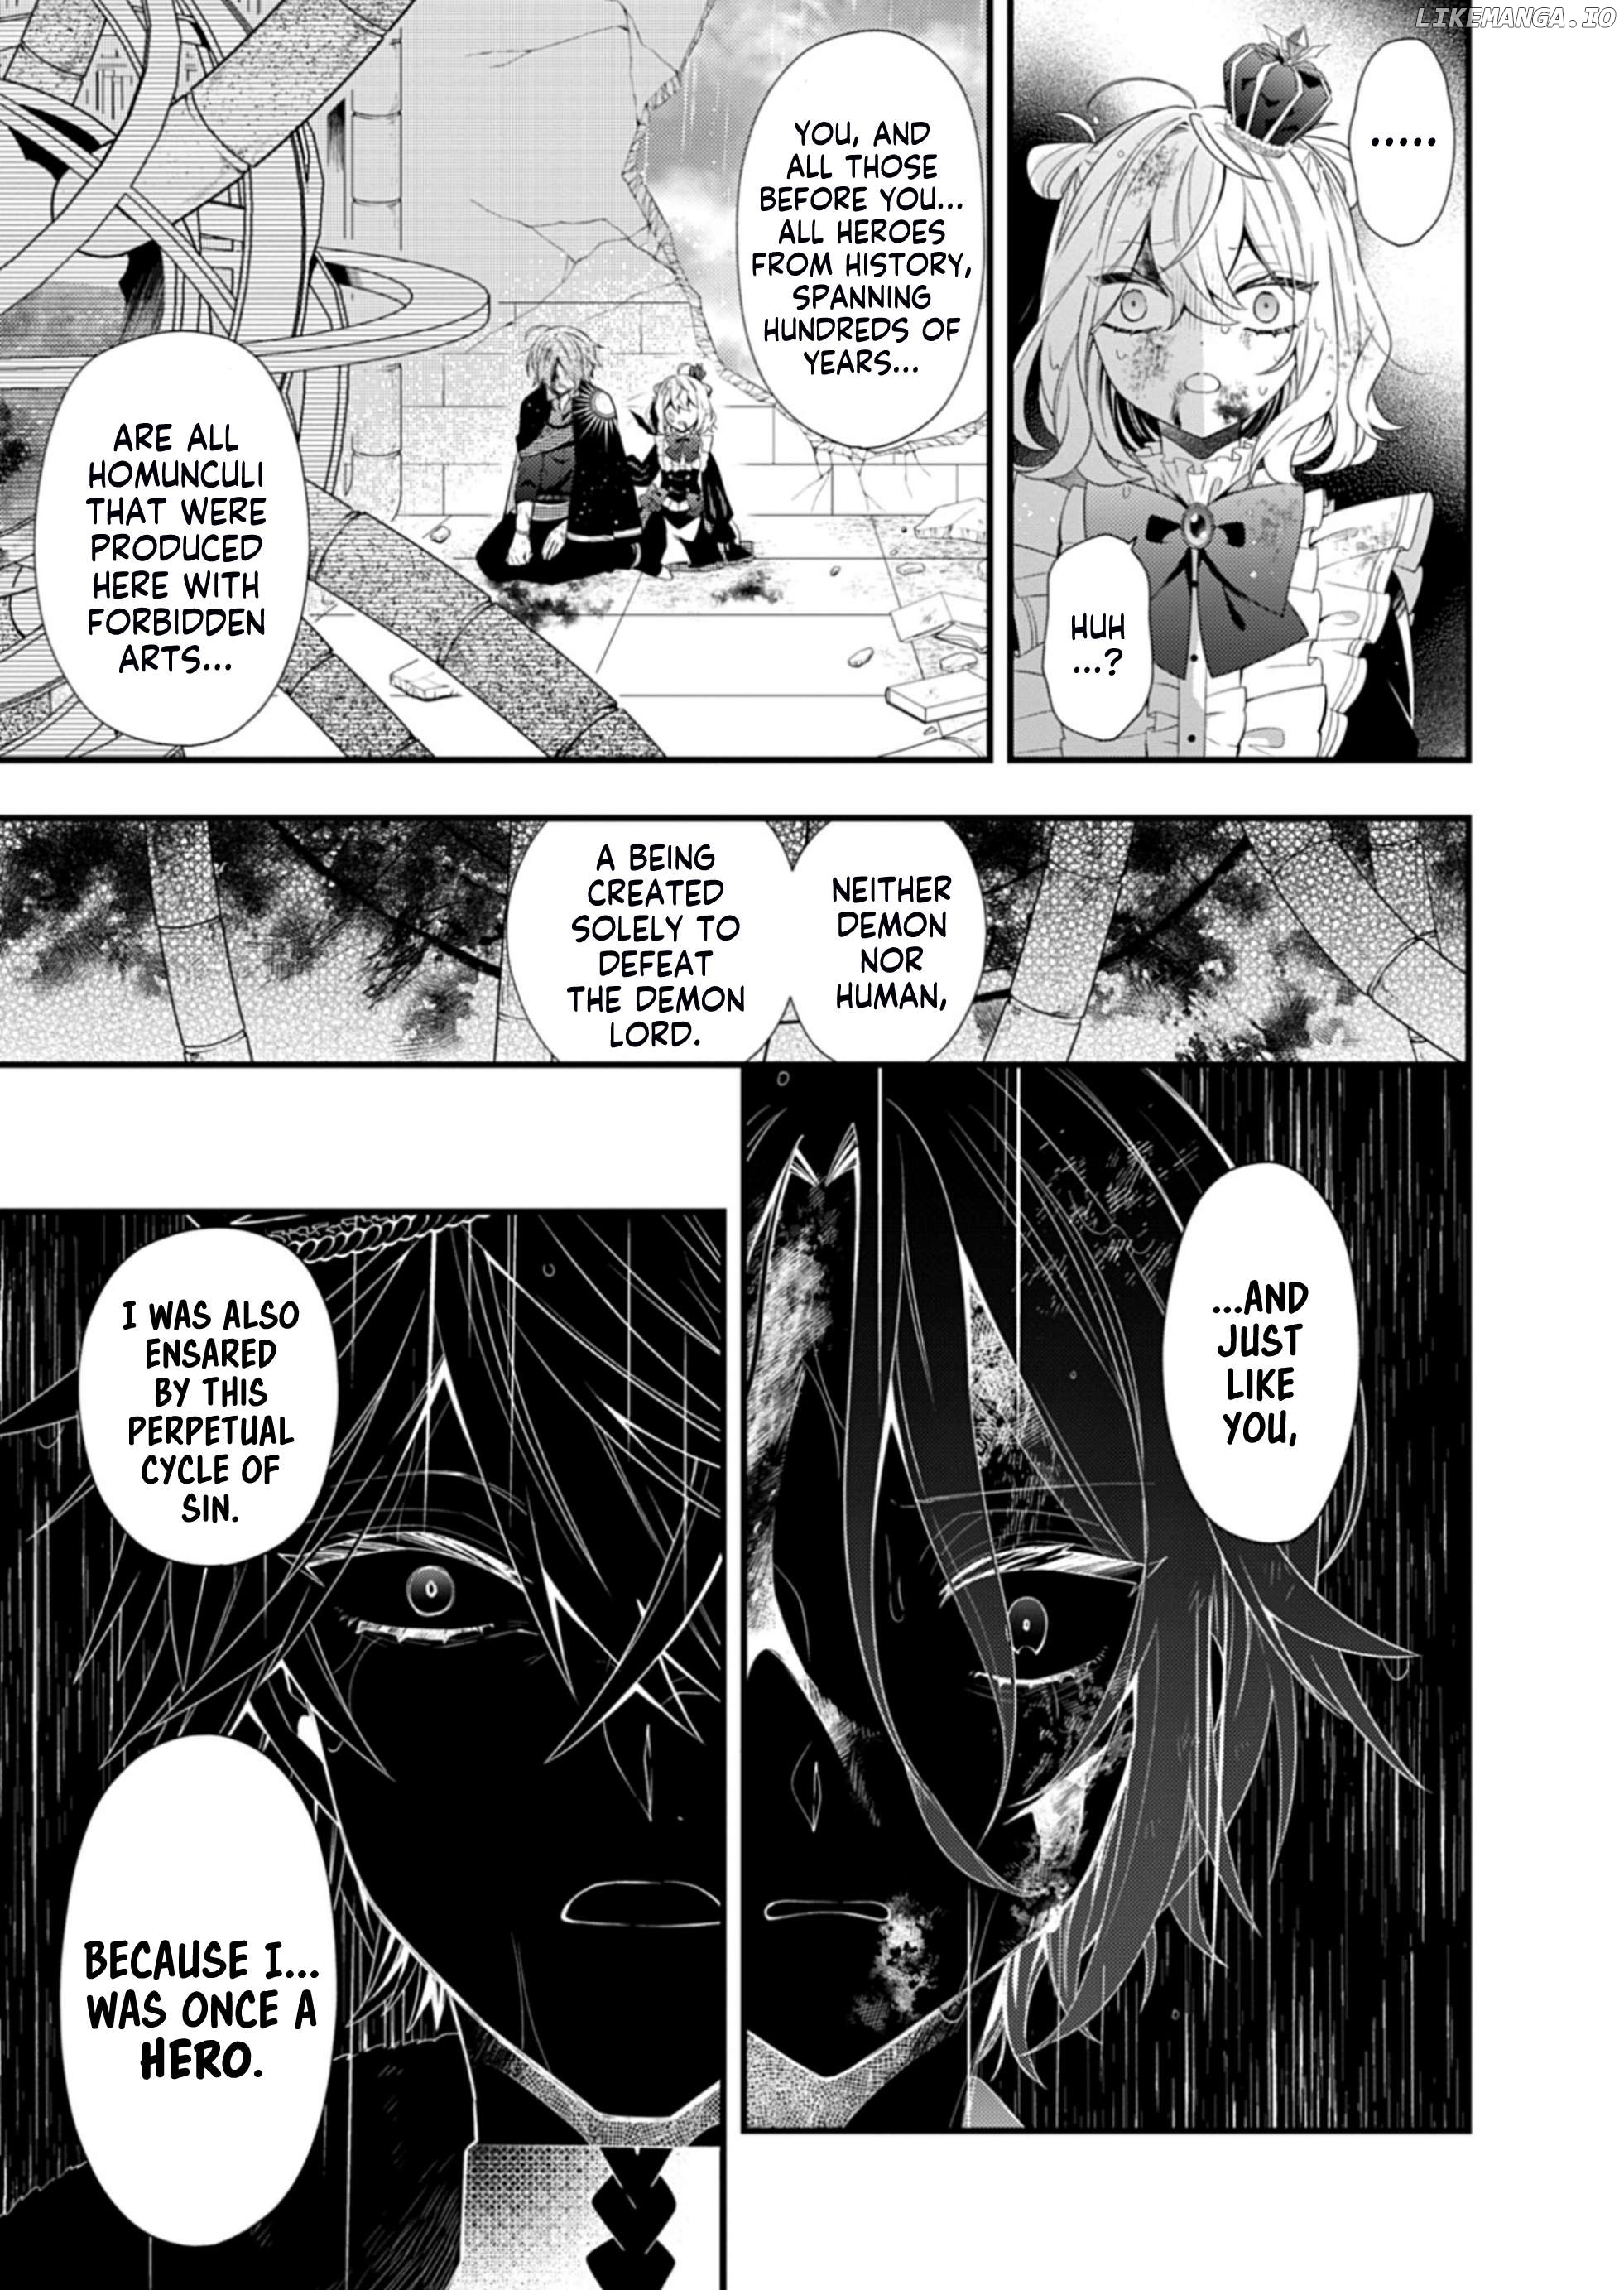 The Old Man That Was Reincarnated as a Young Girl in the Demon World Wants to Become the Demon Lord for the Sake of Peace Chapter 11 - page 32